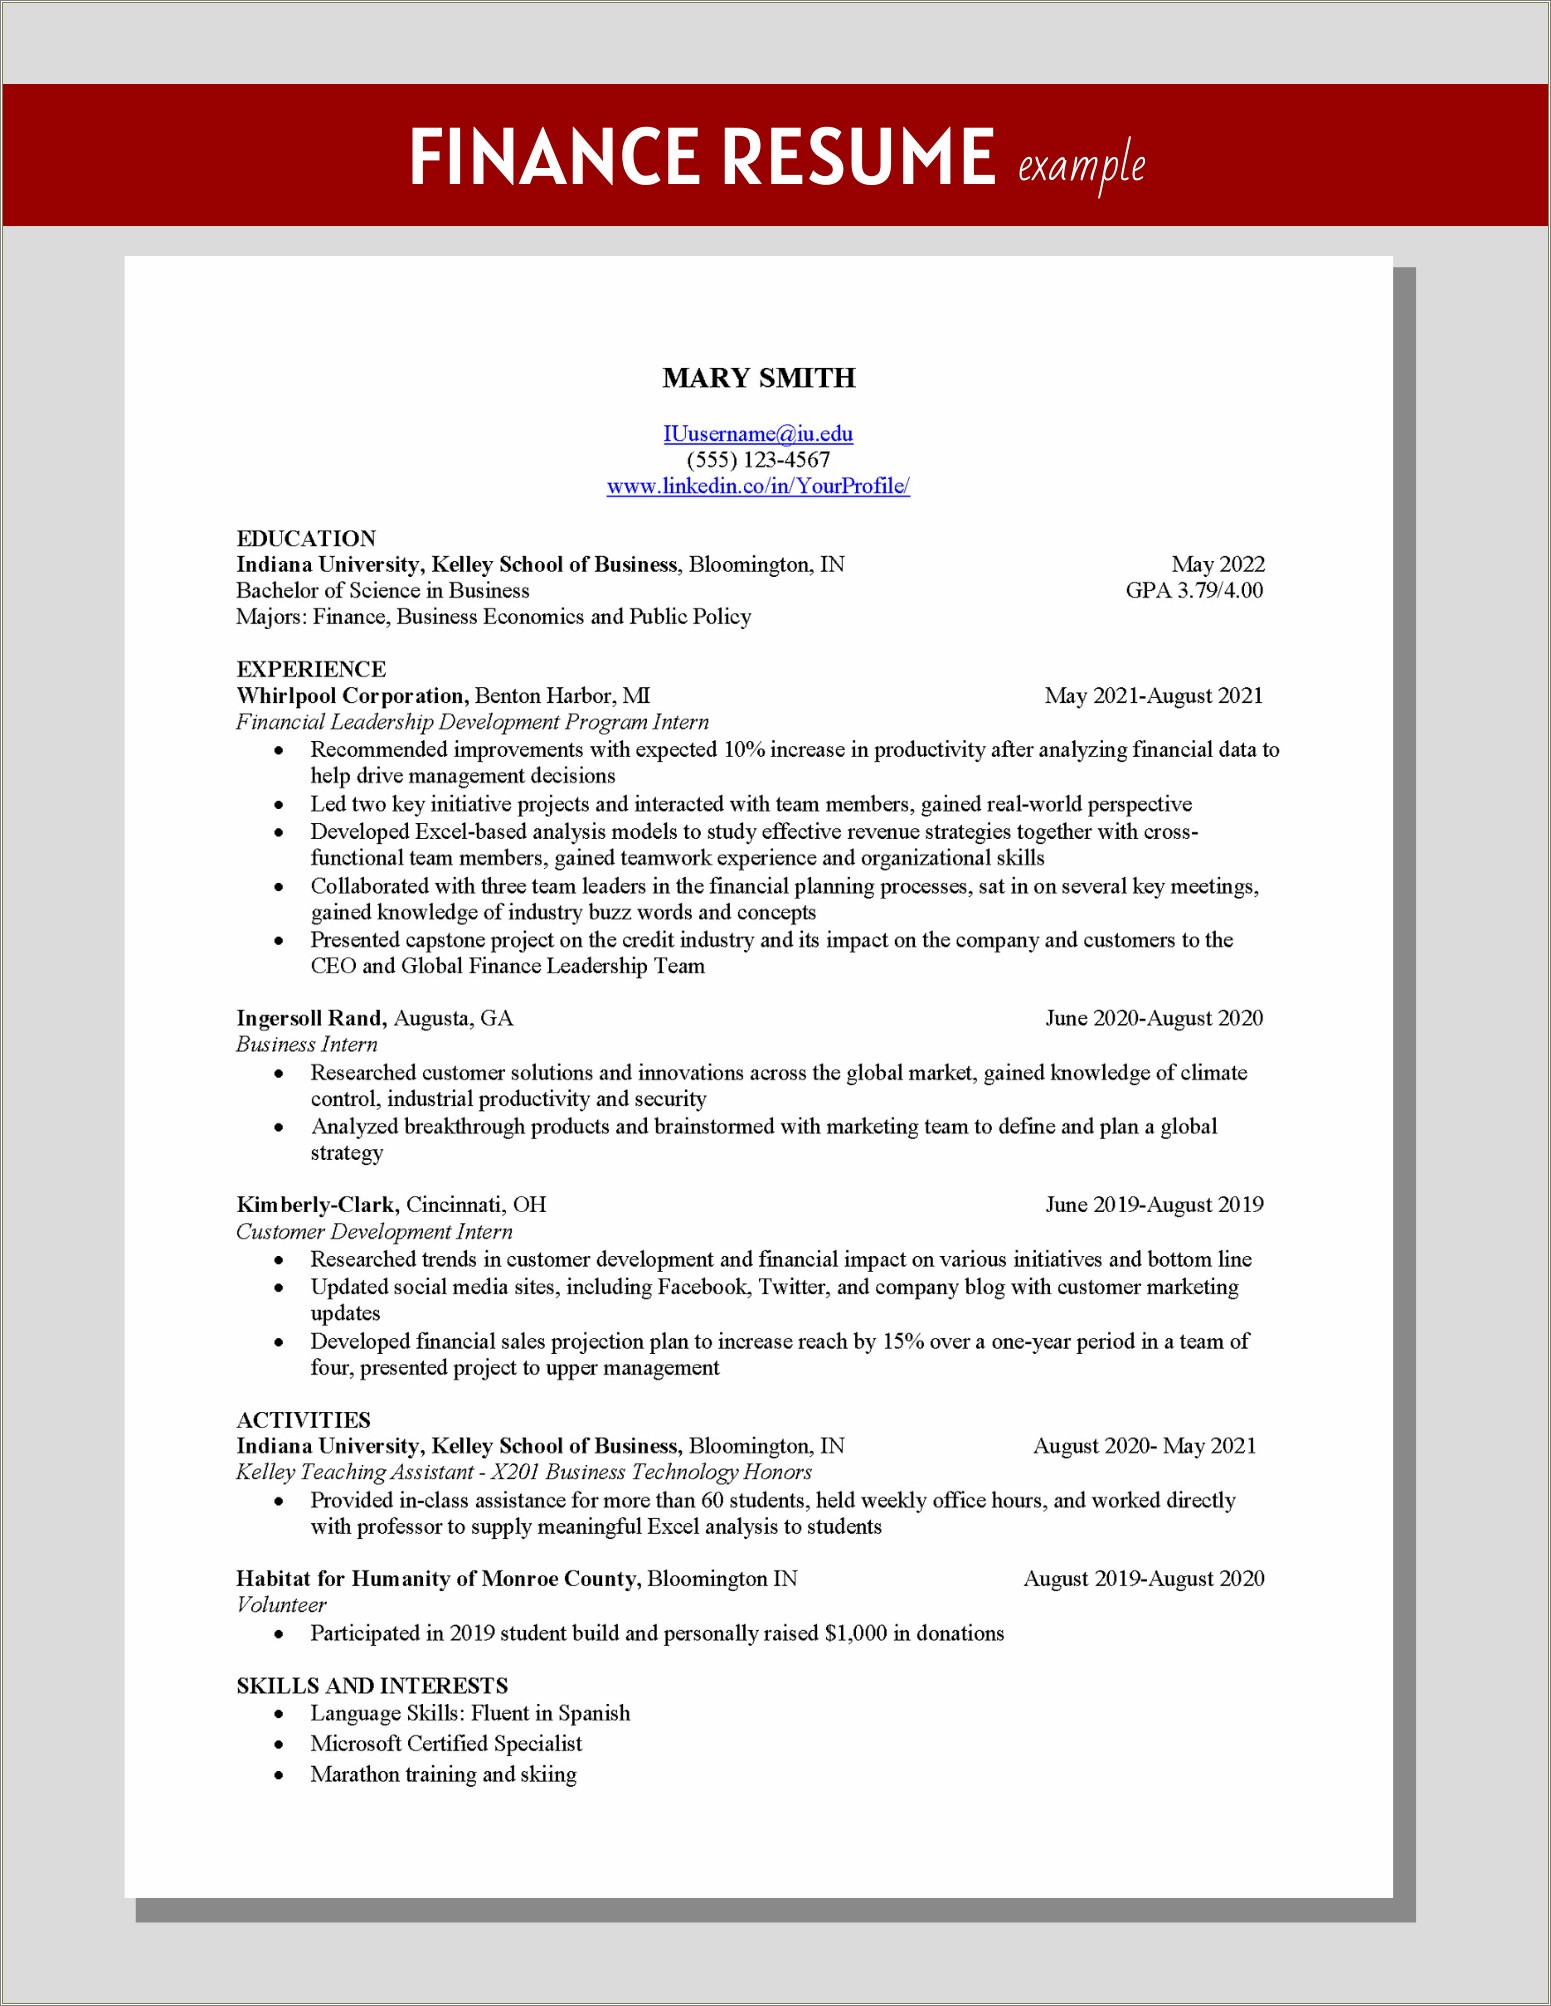 Examples Of Professional Resumes In Finance